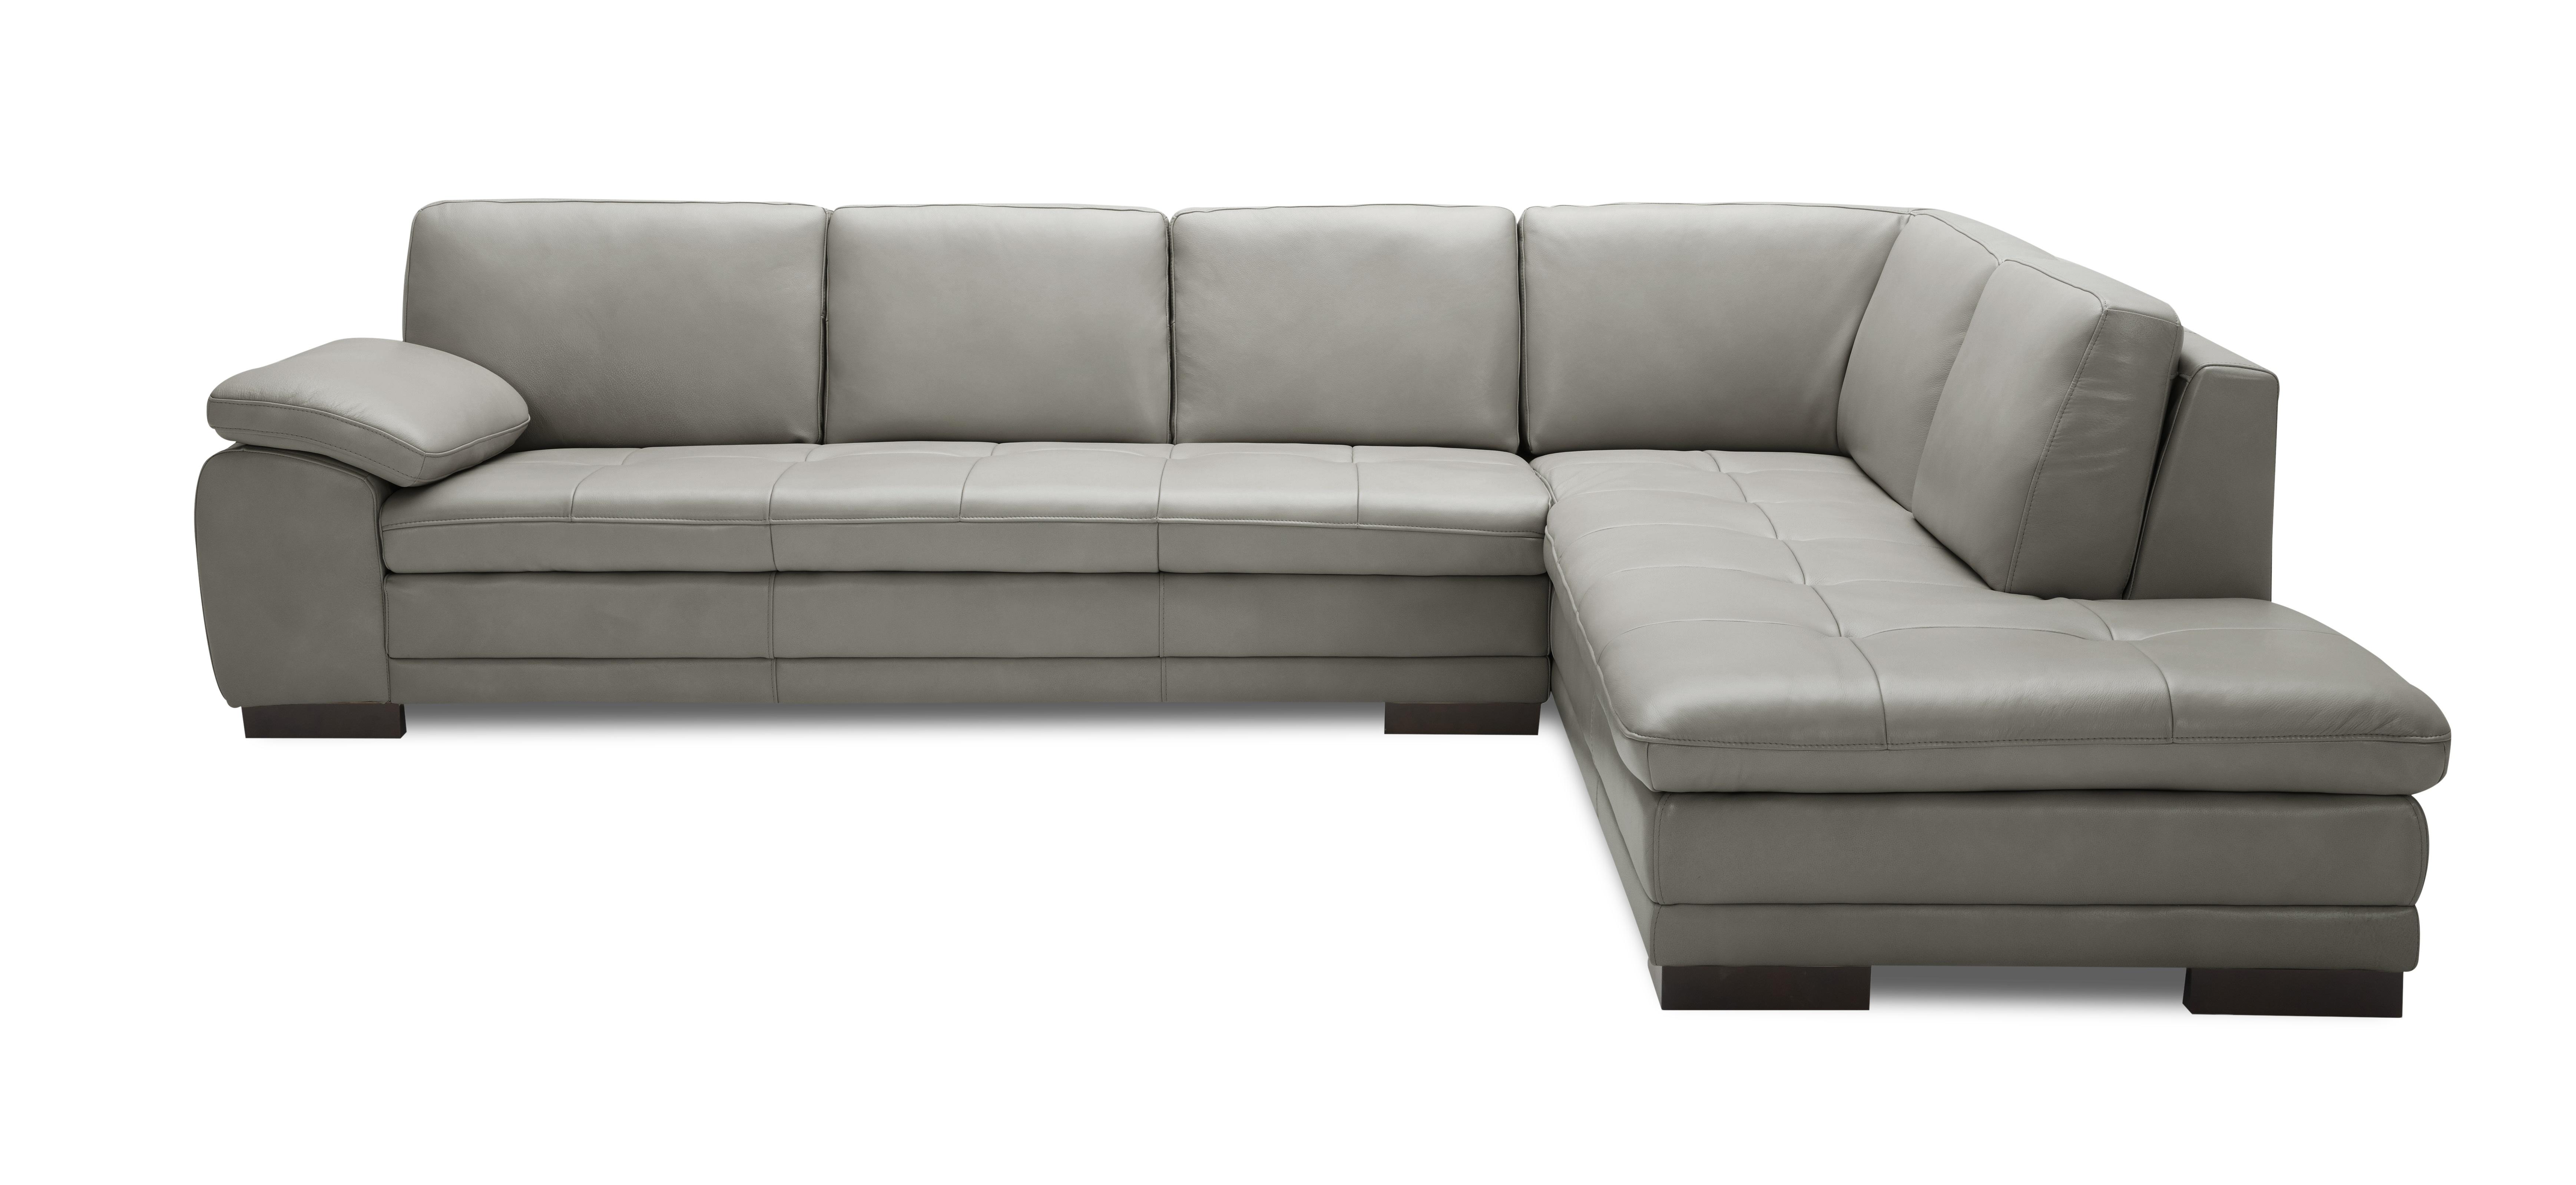 Contemporary Sectional Sofa 625 SKU17544311312859 in Gray Leather